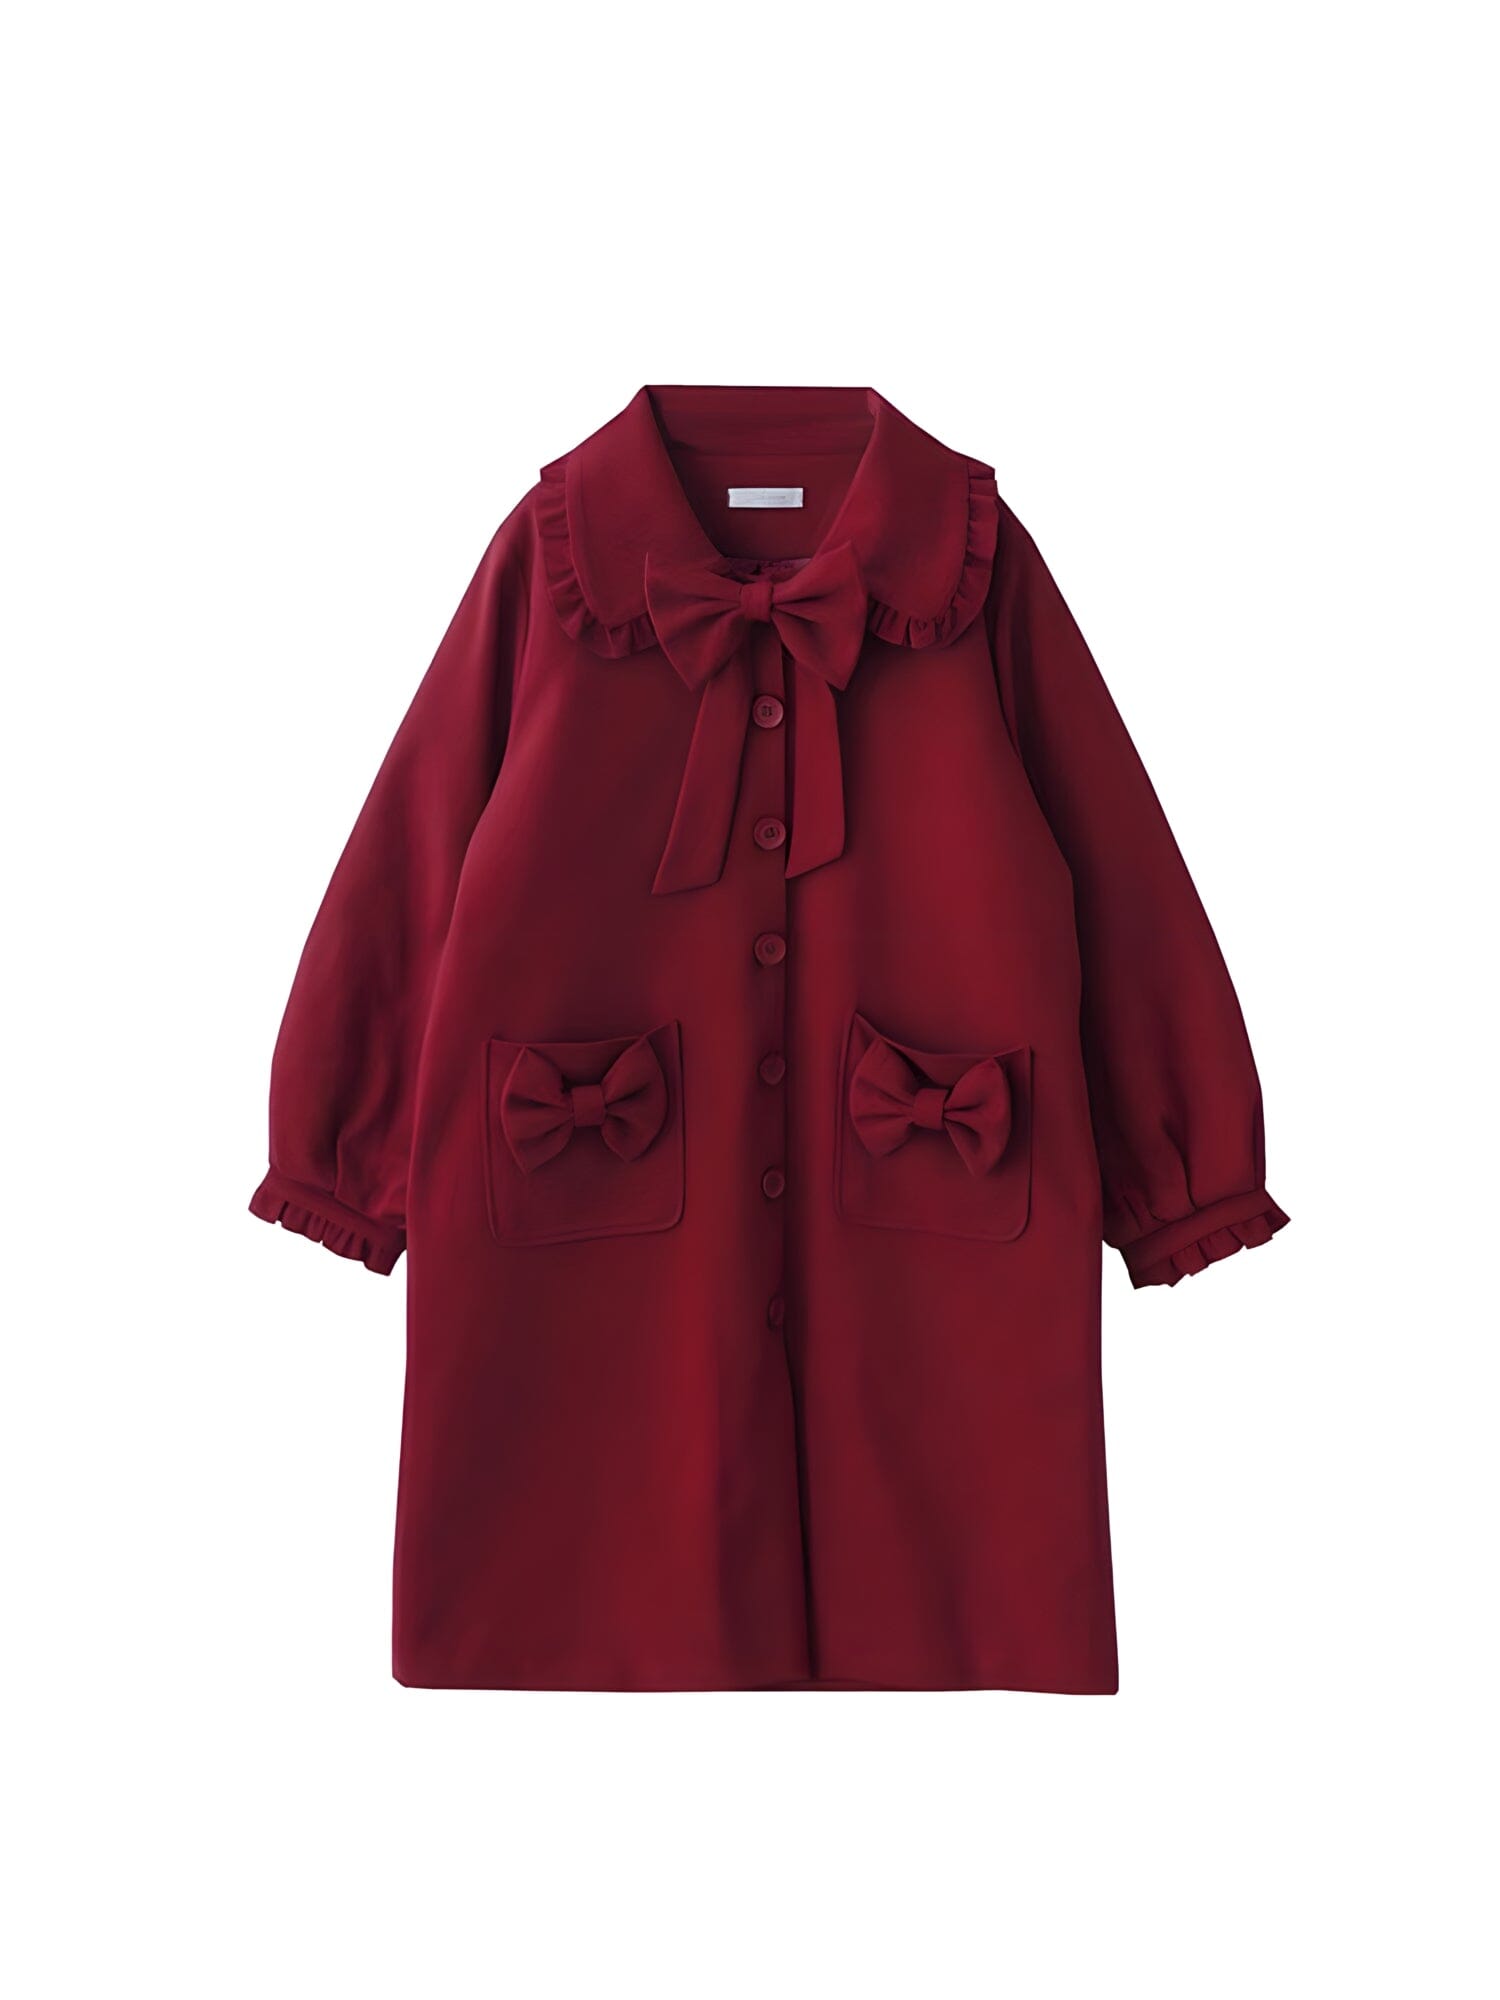 The Hannah Long Tail Winter Overcoat - Multiple Colors 0 SA Styles Red S 